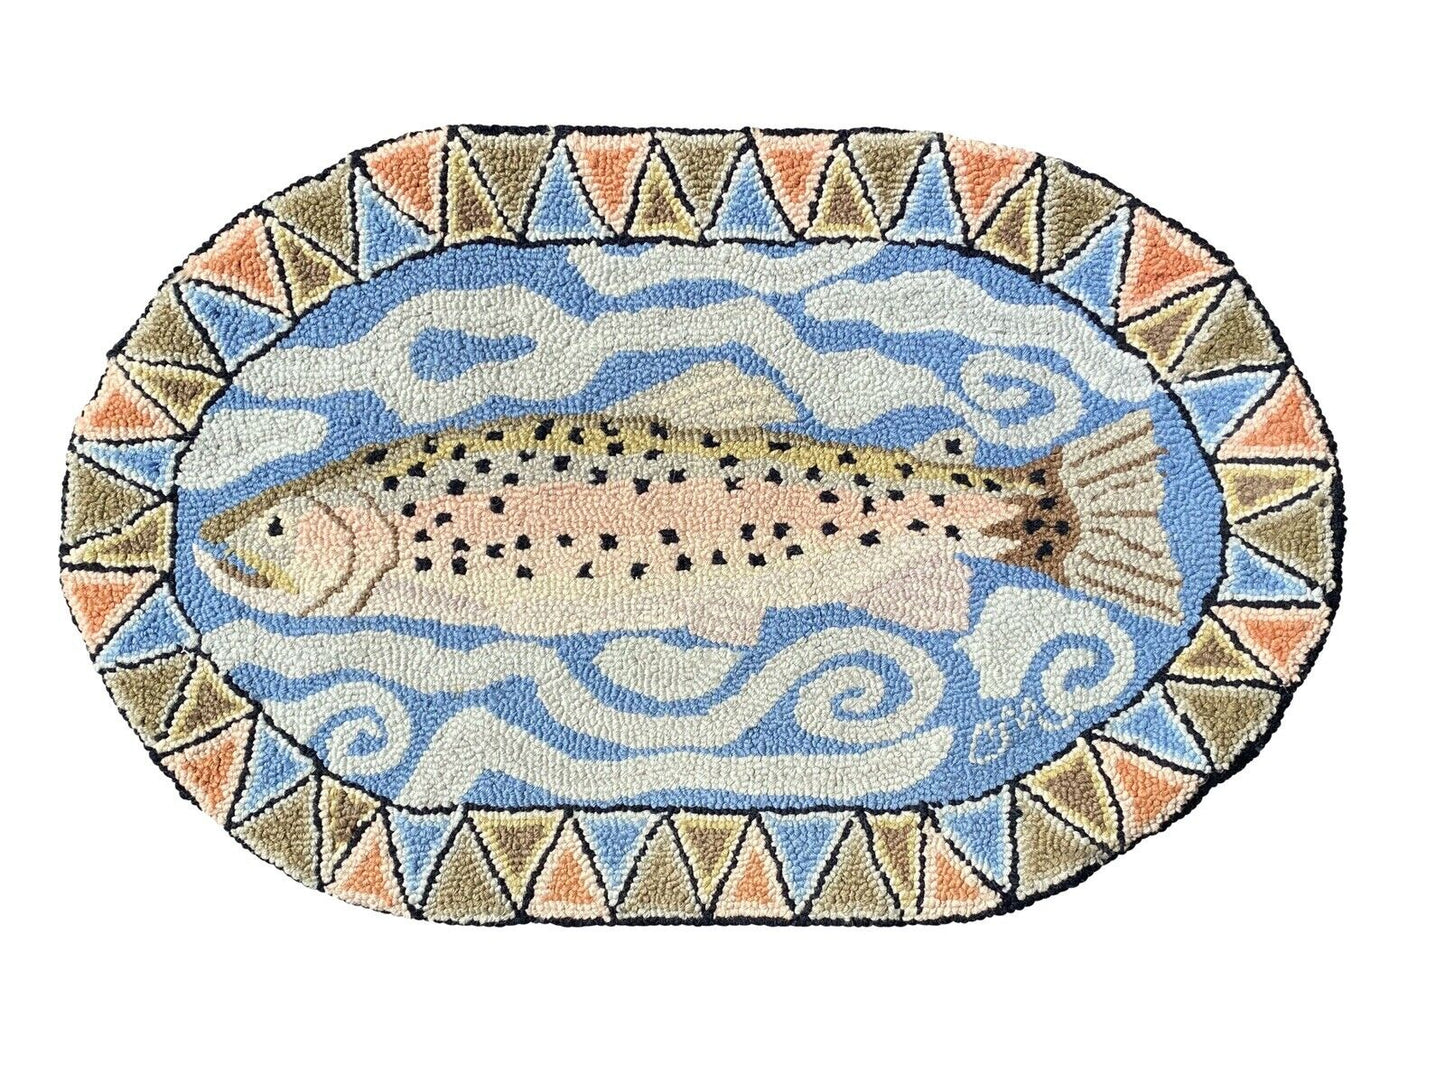 20TH C HAND HOOKED RUG WITH SPOTTED TROUT FISH DESIGN - CLAIRE MURRAY NANTUCKET